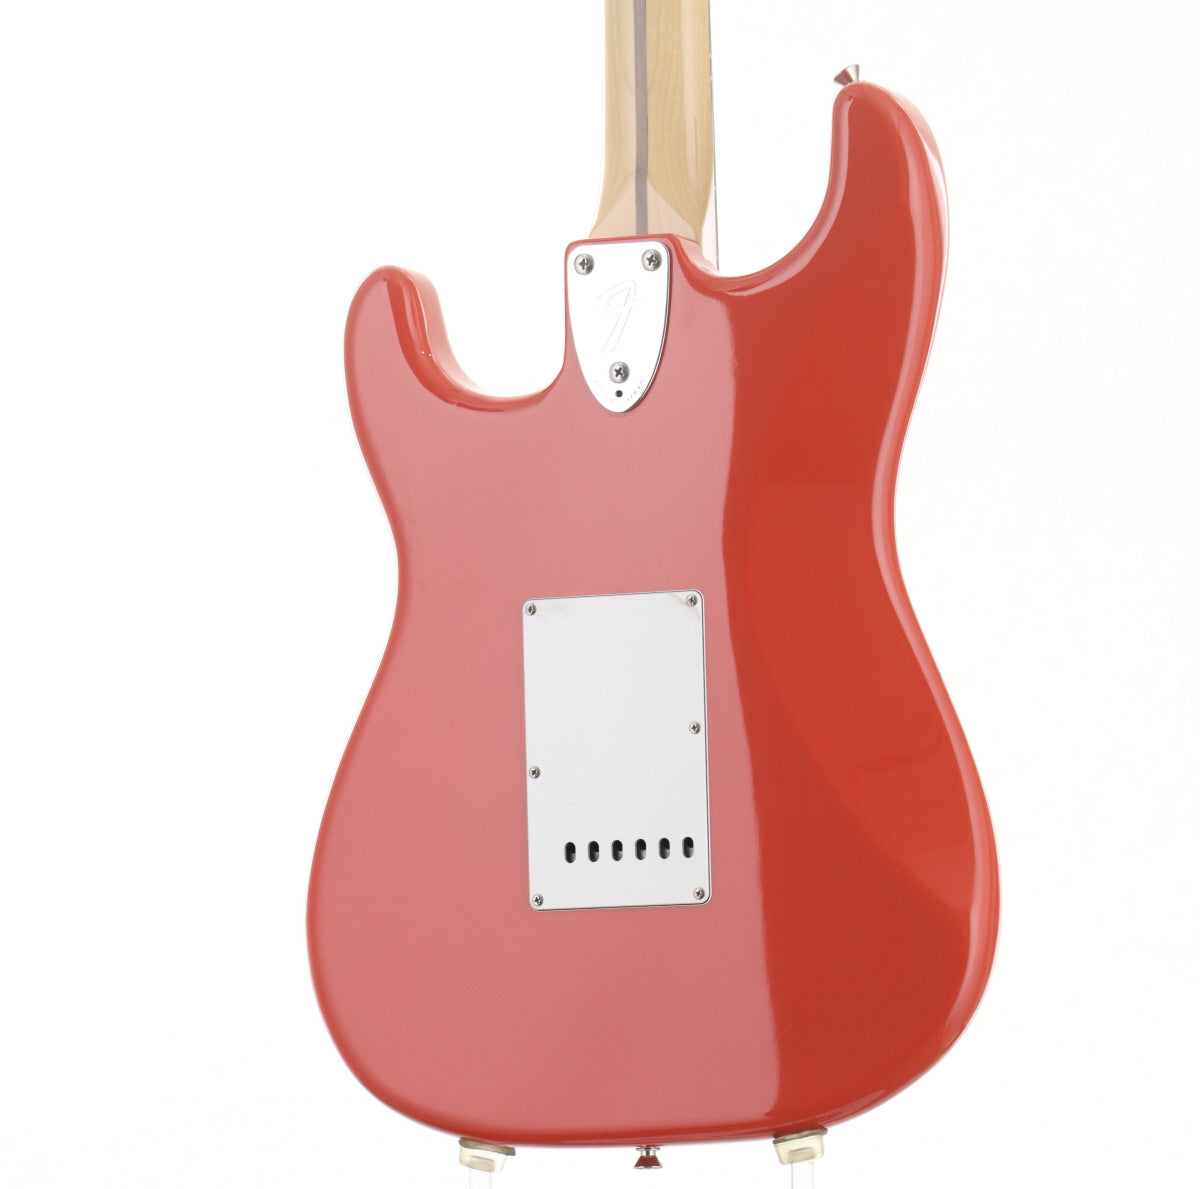 [SN JD22009125] USED Fender / Made in Japan Limited International Color Stratocaster Morocco Red 2022 [09]